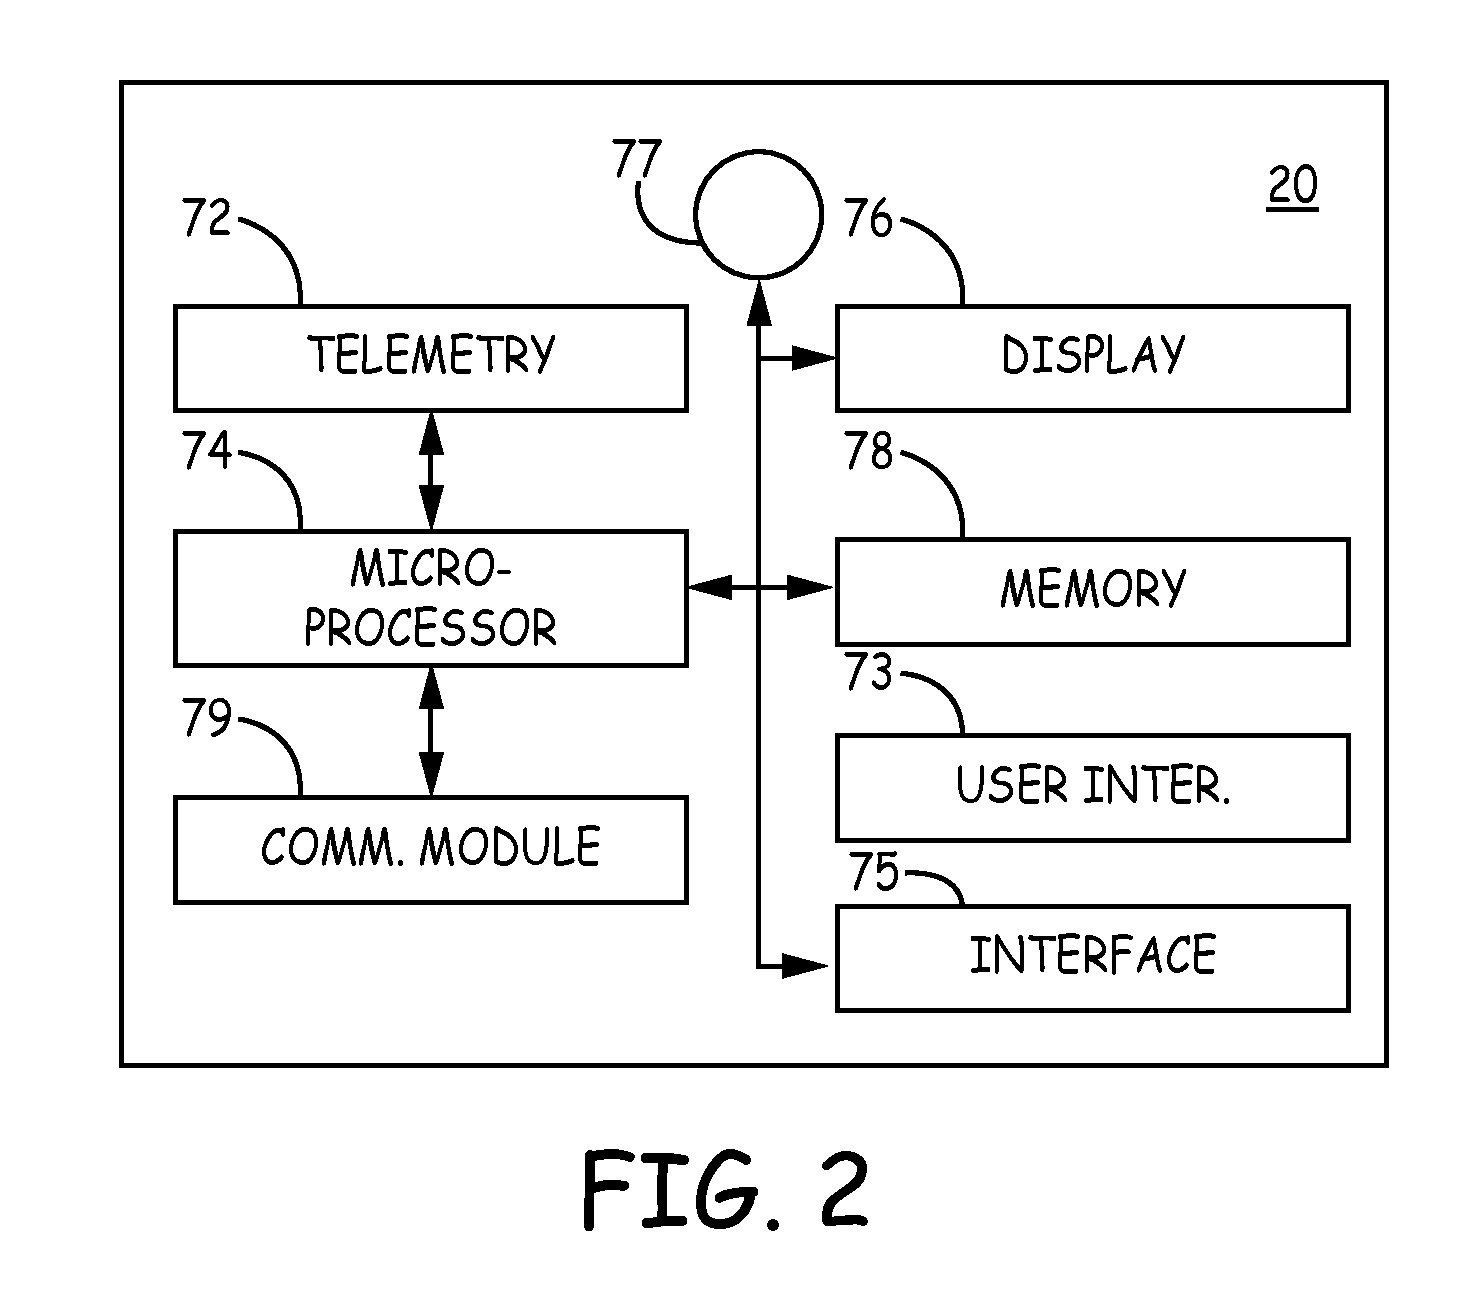 Method and apparatus for automatic configuration of implantable medical devices